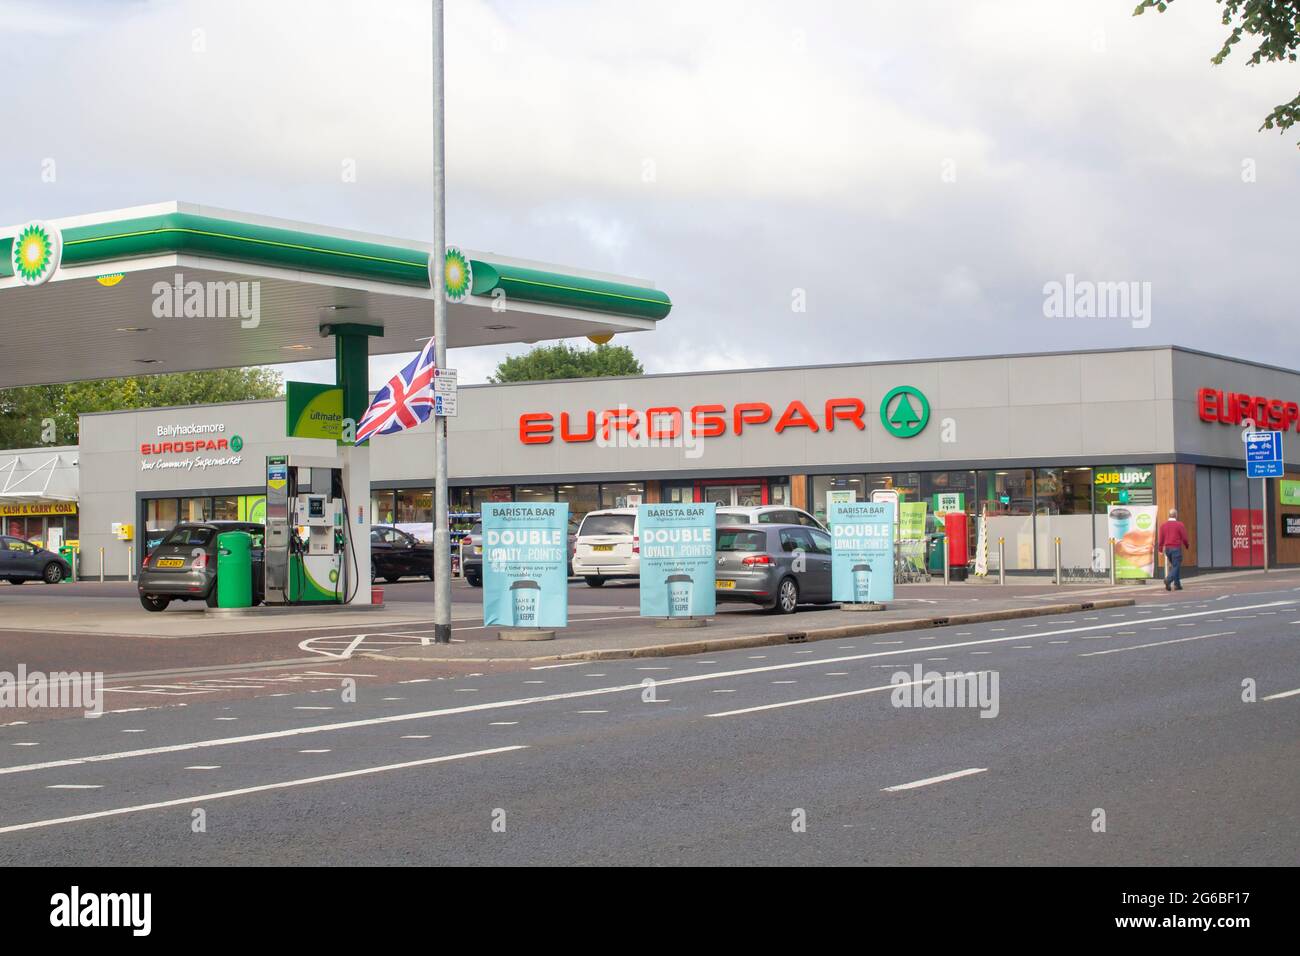 4 July 2021 Newtownards Road Belfast Northern Ireland A modern retail shopping complex hosting a large Eurospar Supermarket and fuel filling station p Stock Photo